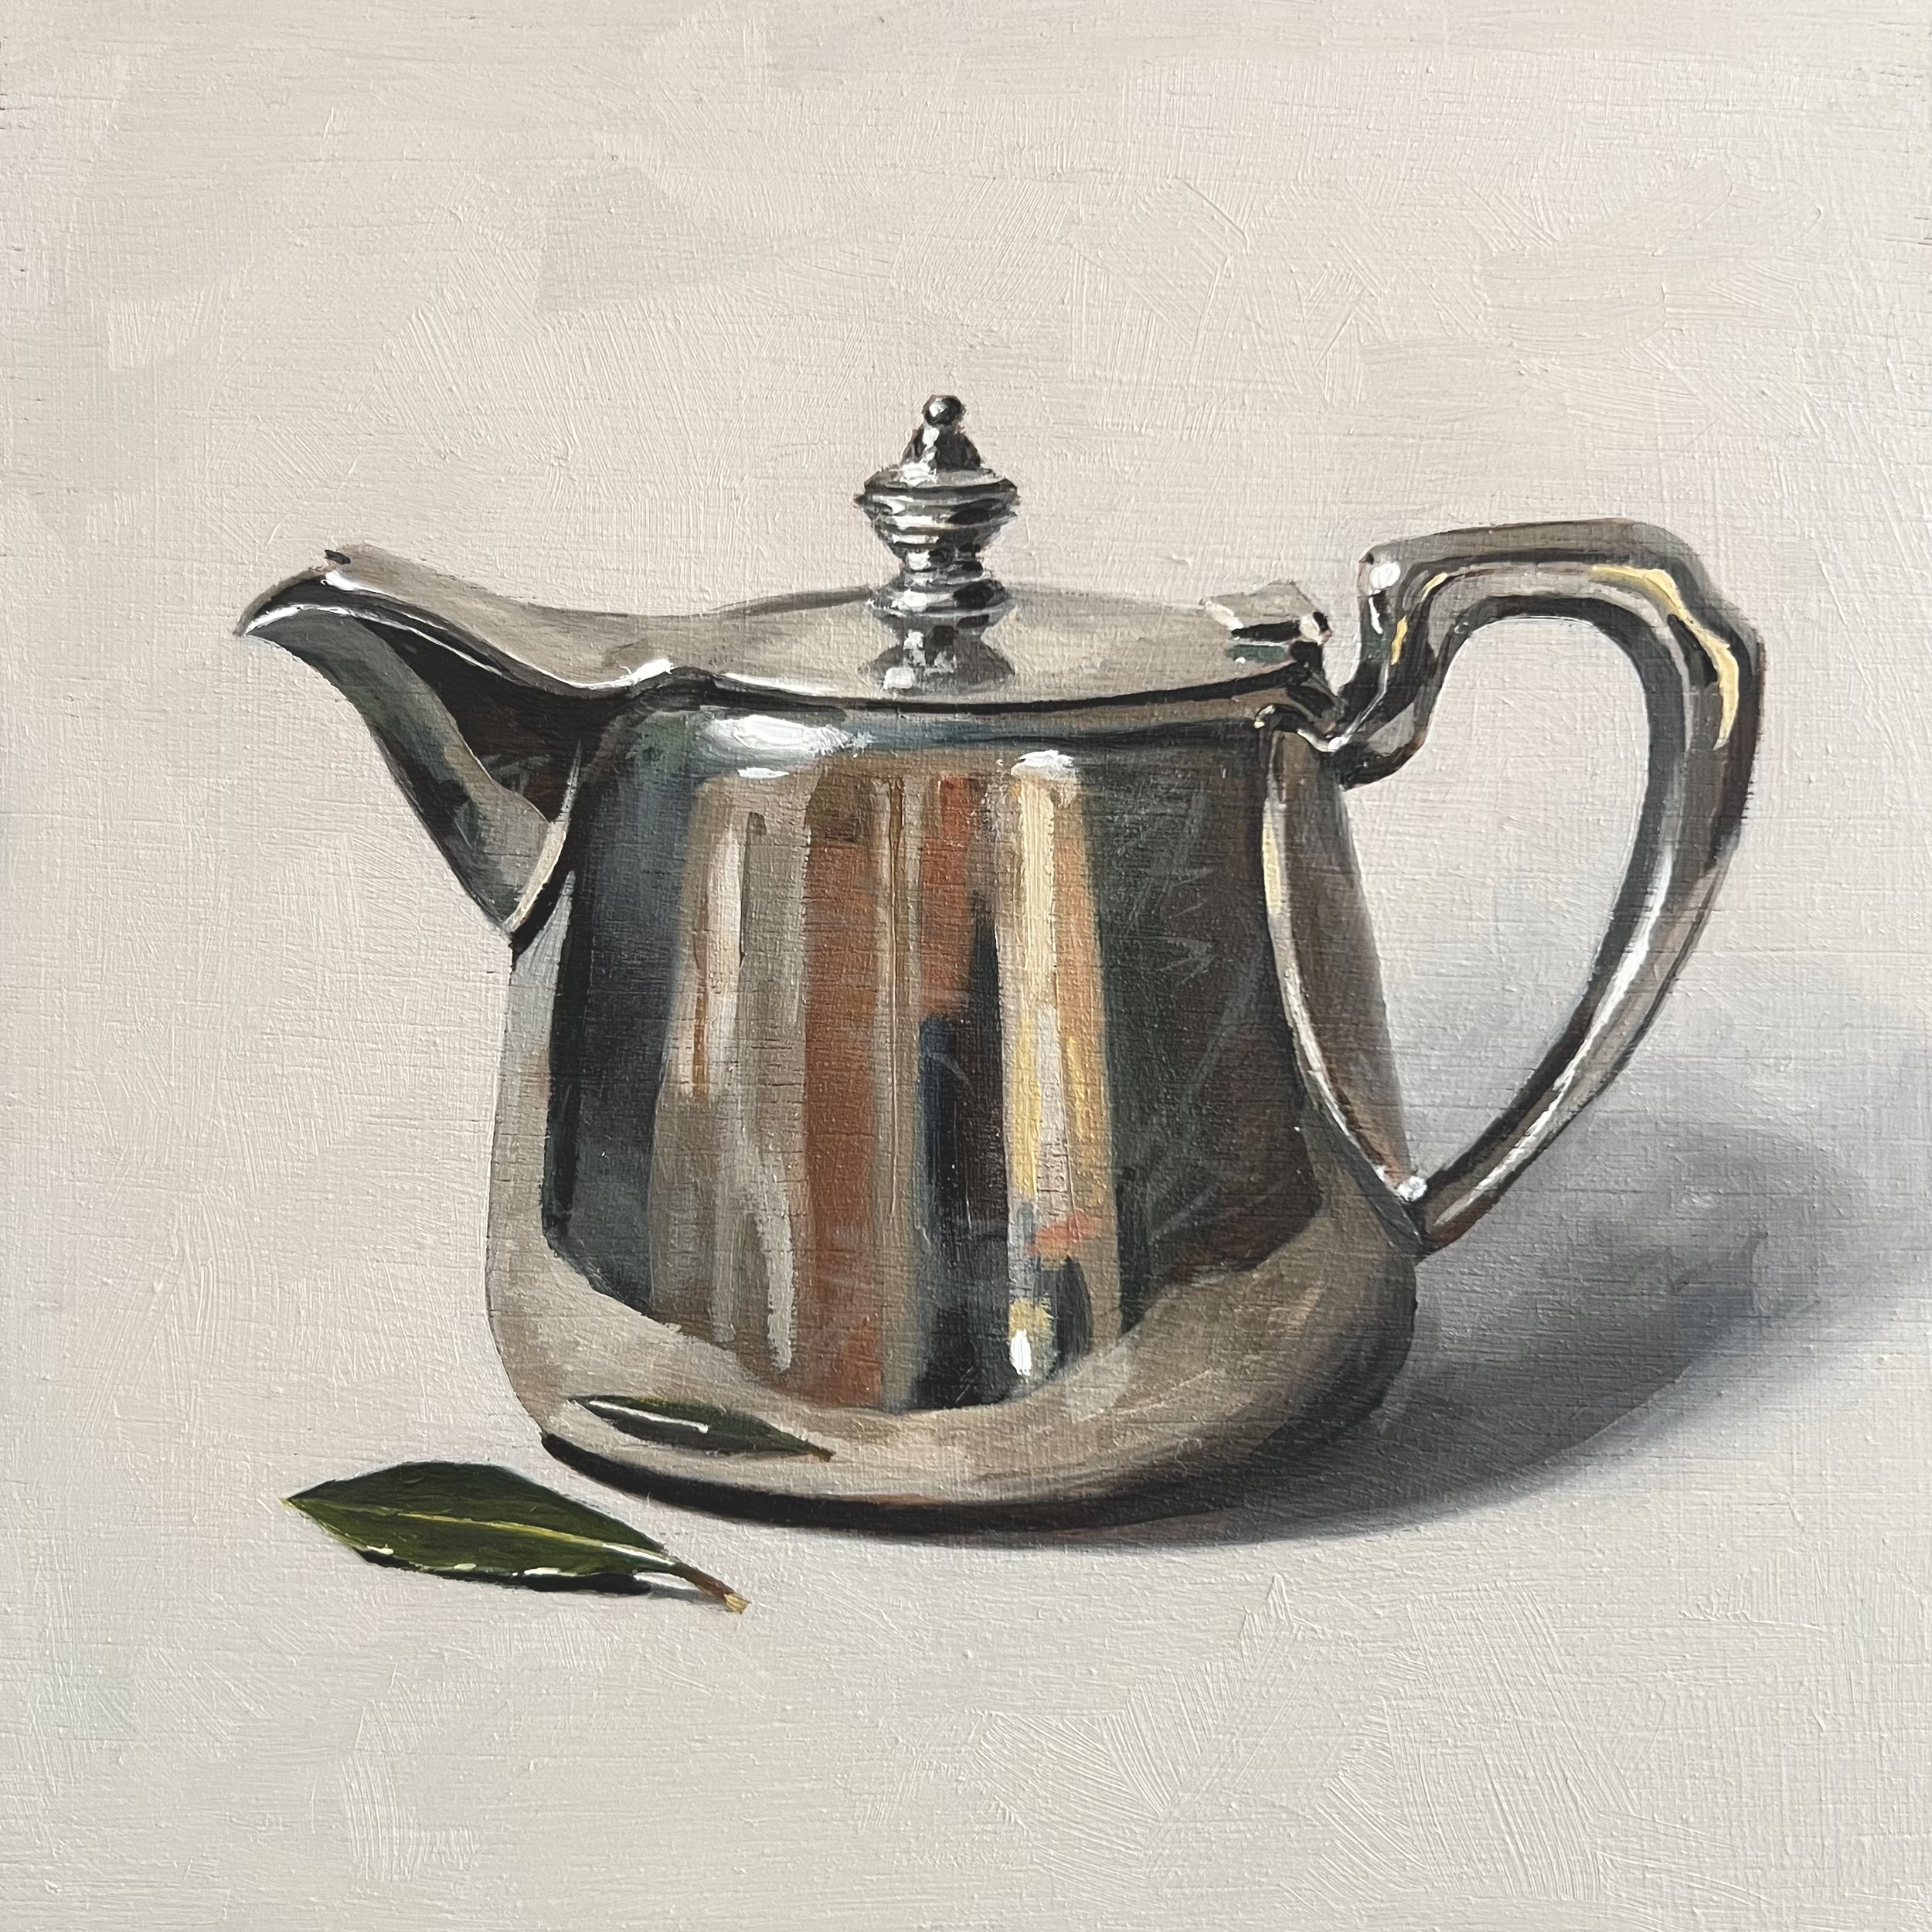 Silver teapot with bay leaf